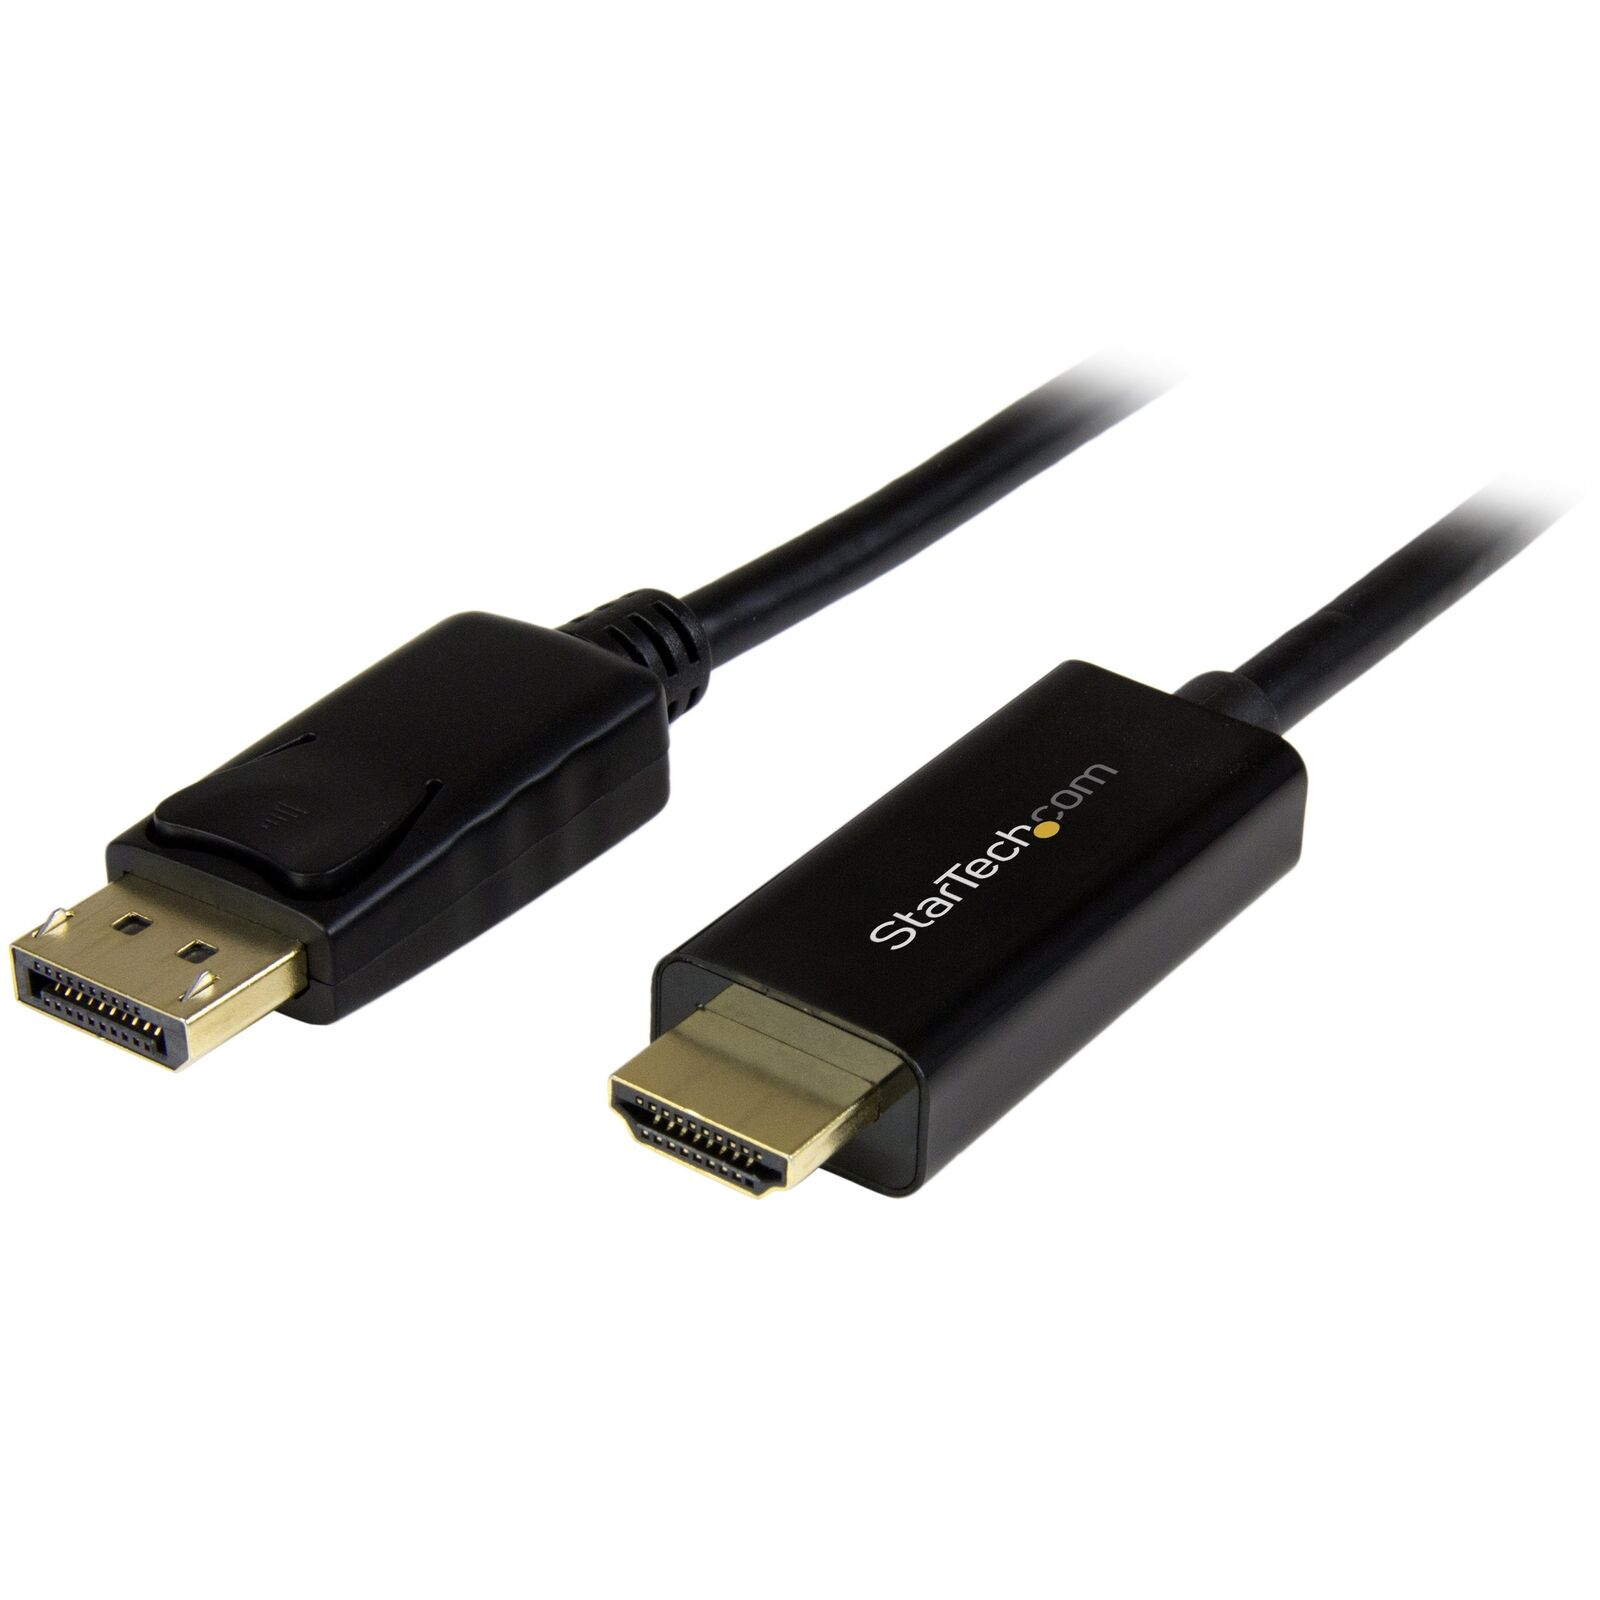 StarTech.com USB C to USB Cable - 6 ft / 2m - USB A to C - USB 2.0 Cable - USB A